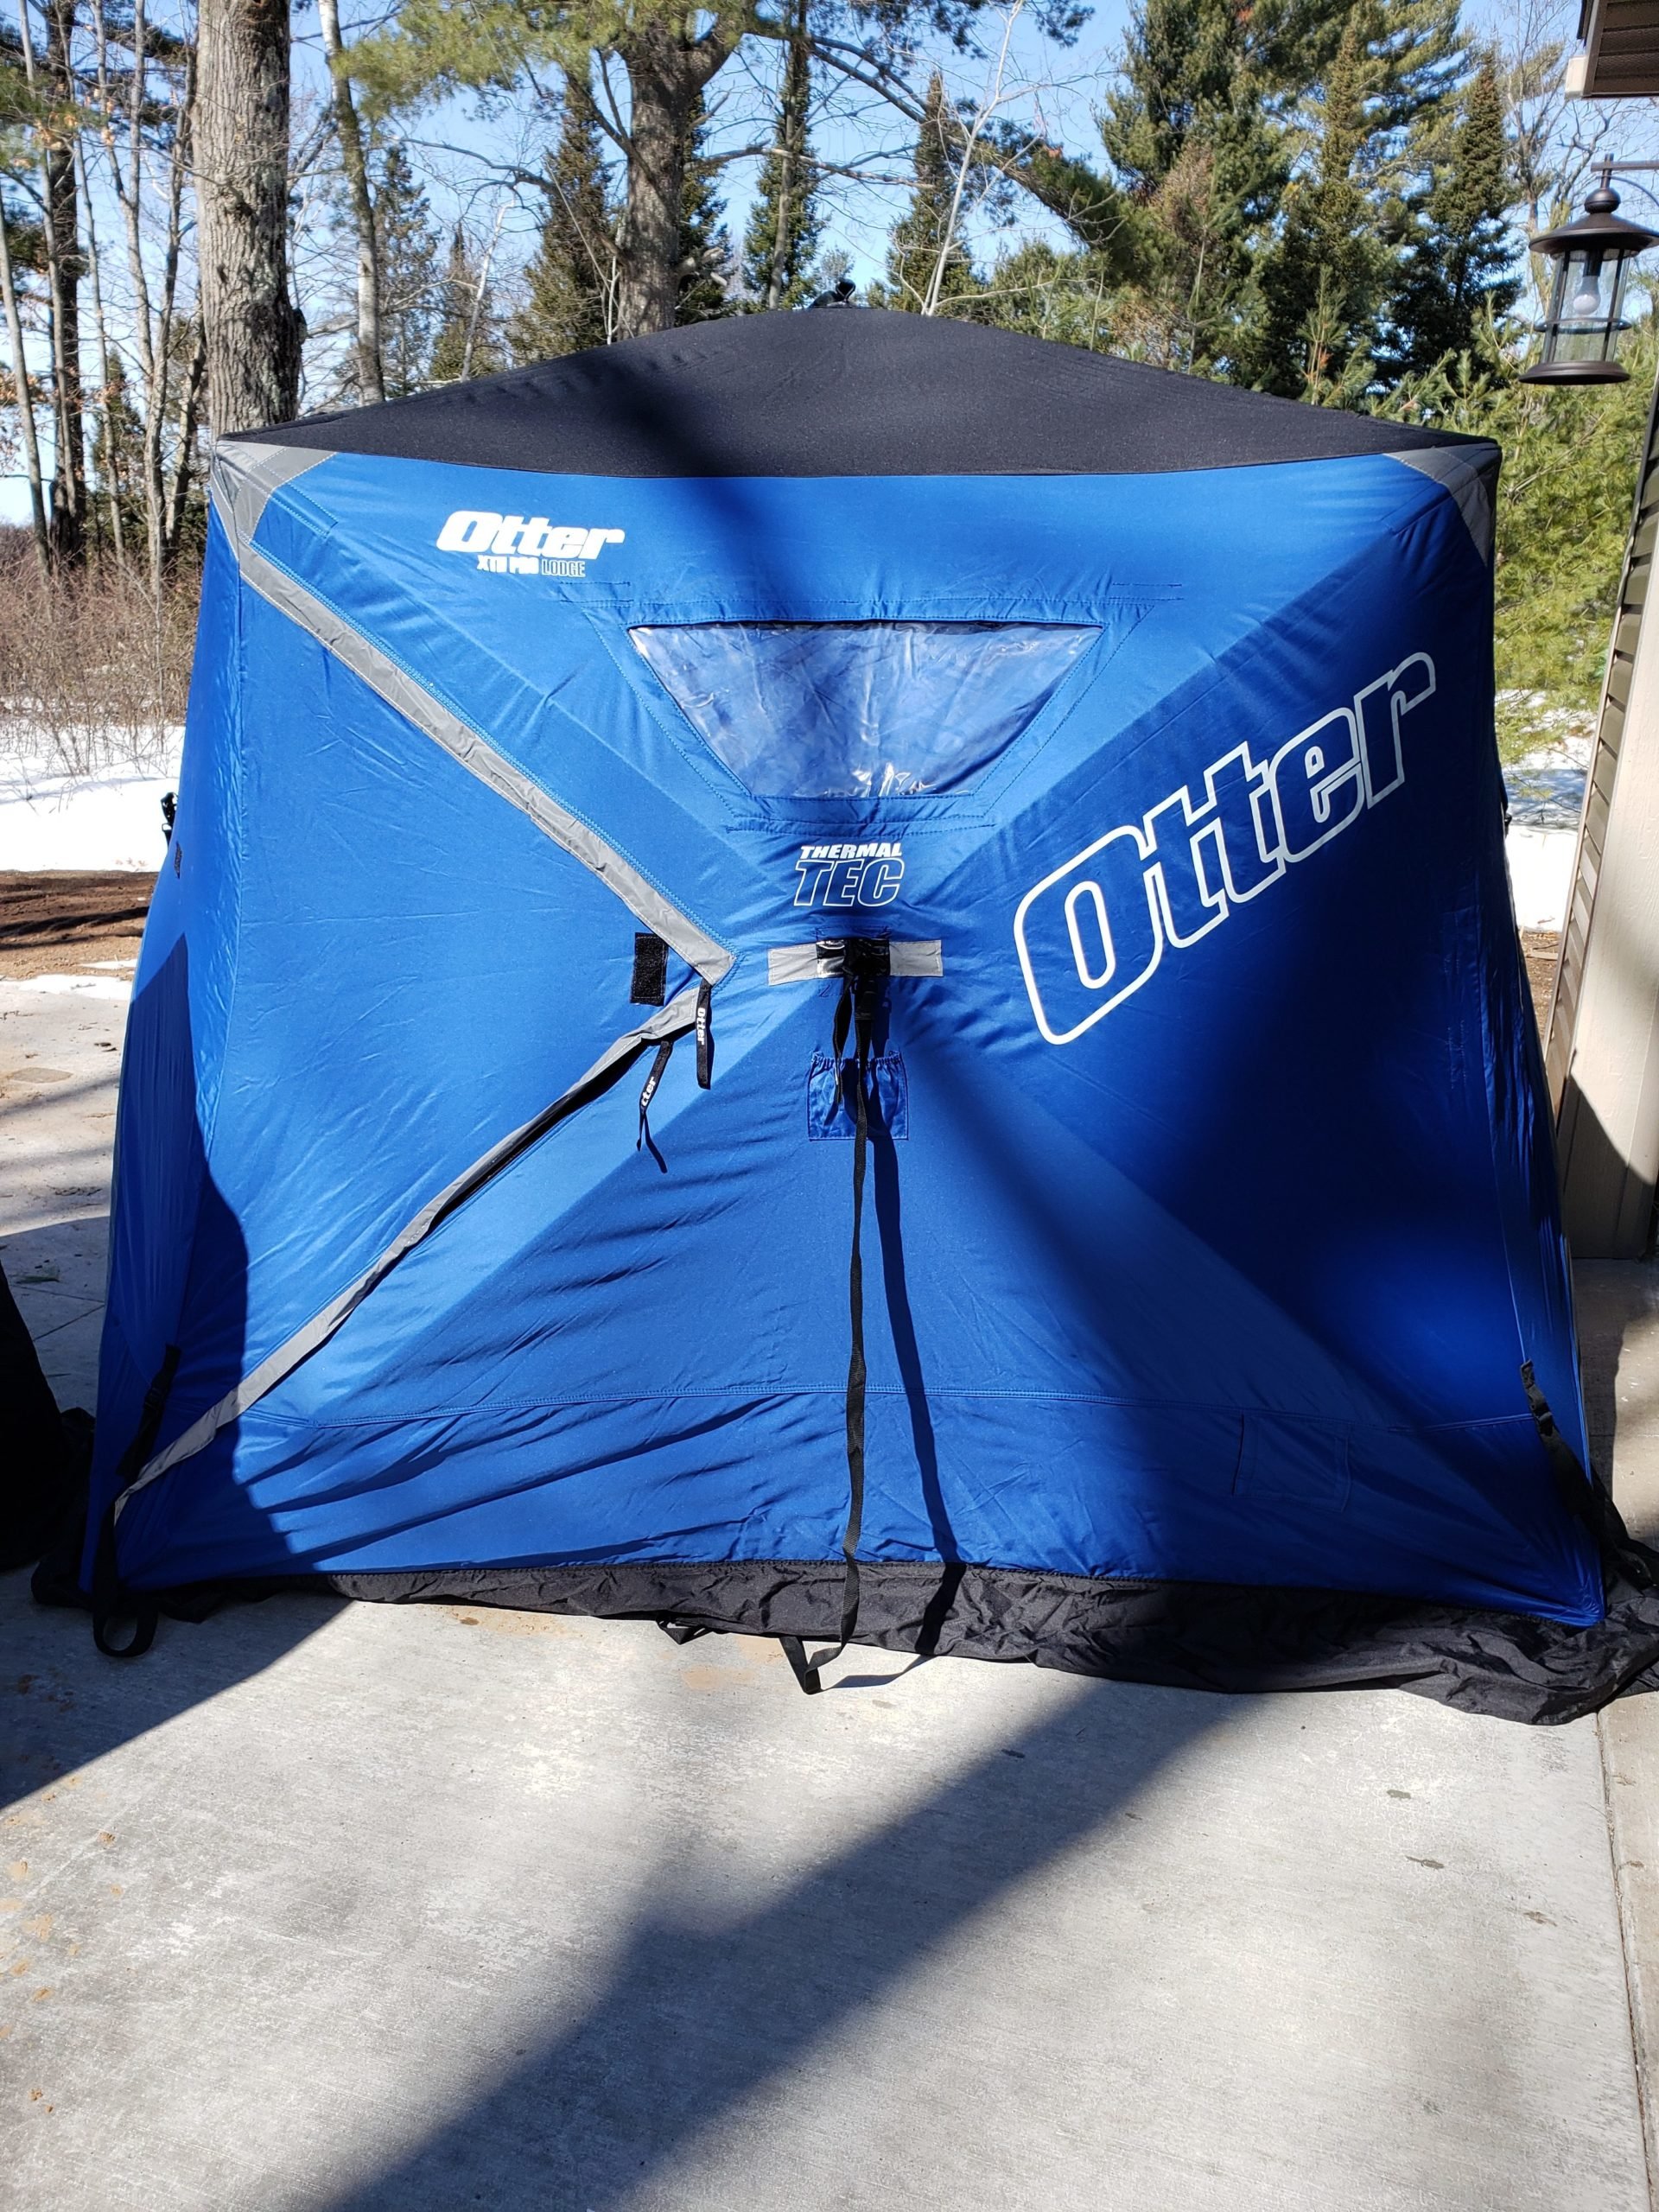 Otter XTH pro lodge insulated hub shelter and Otter Pro series